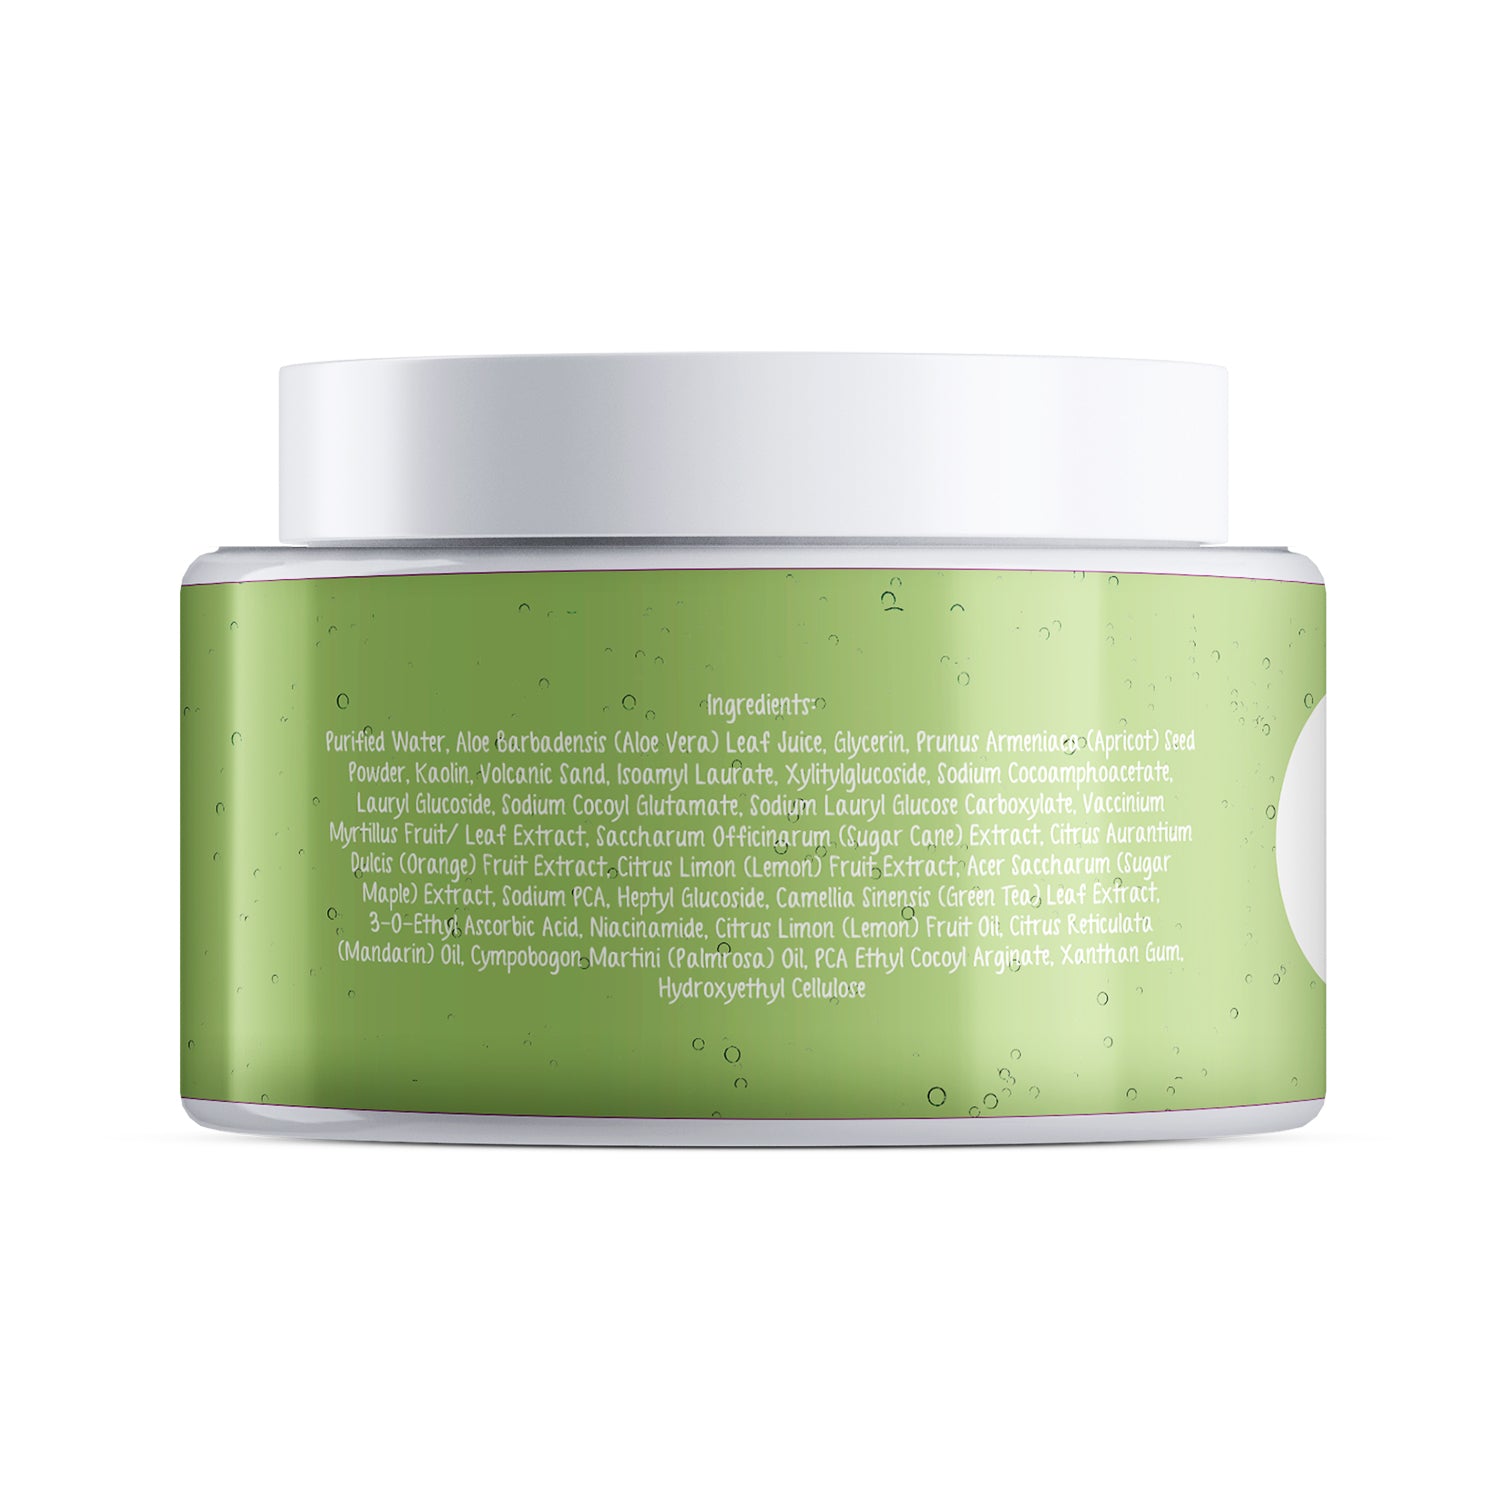 The Moms Co. Natural Green Tea Body Scrub I Gentle Exfoliation & Detox l With Apricot seed, Black Sand and Vitamin C (100 gm)